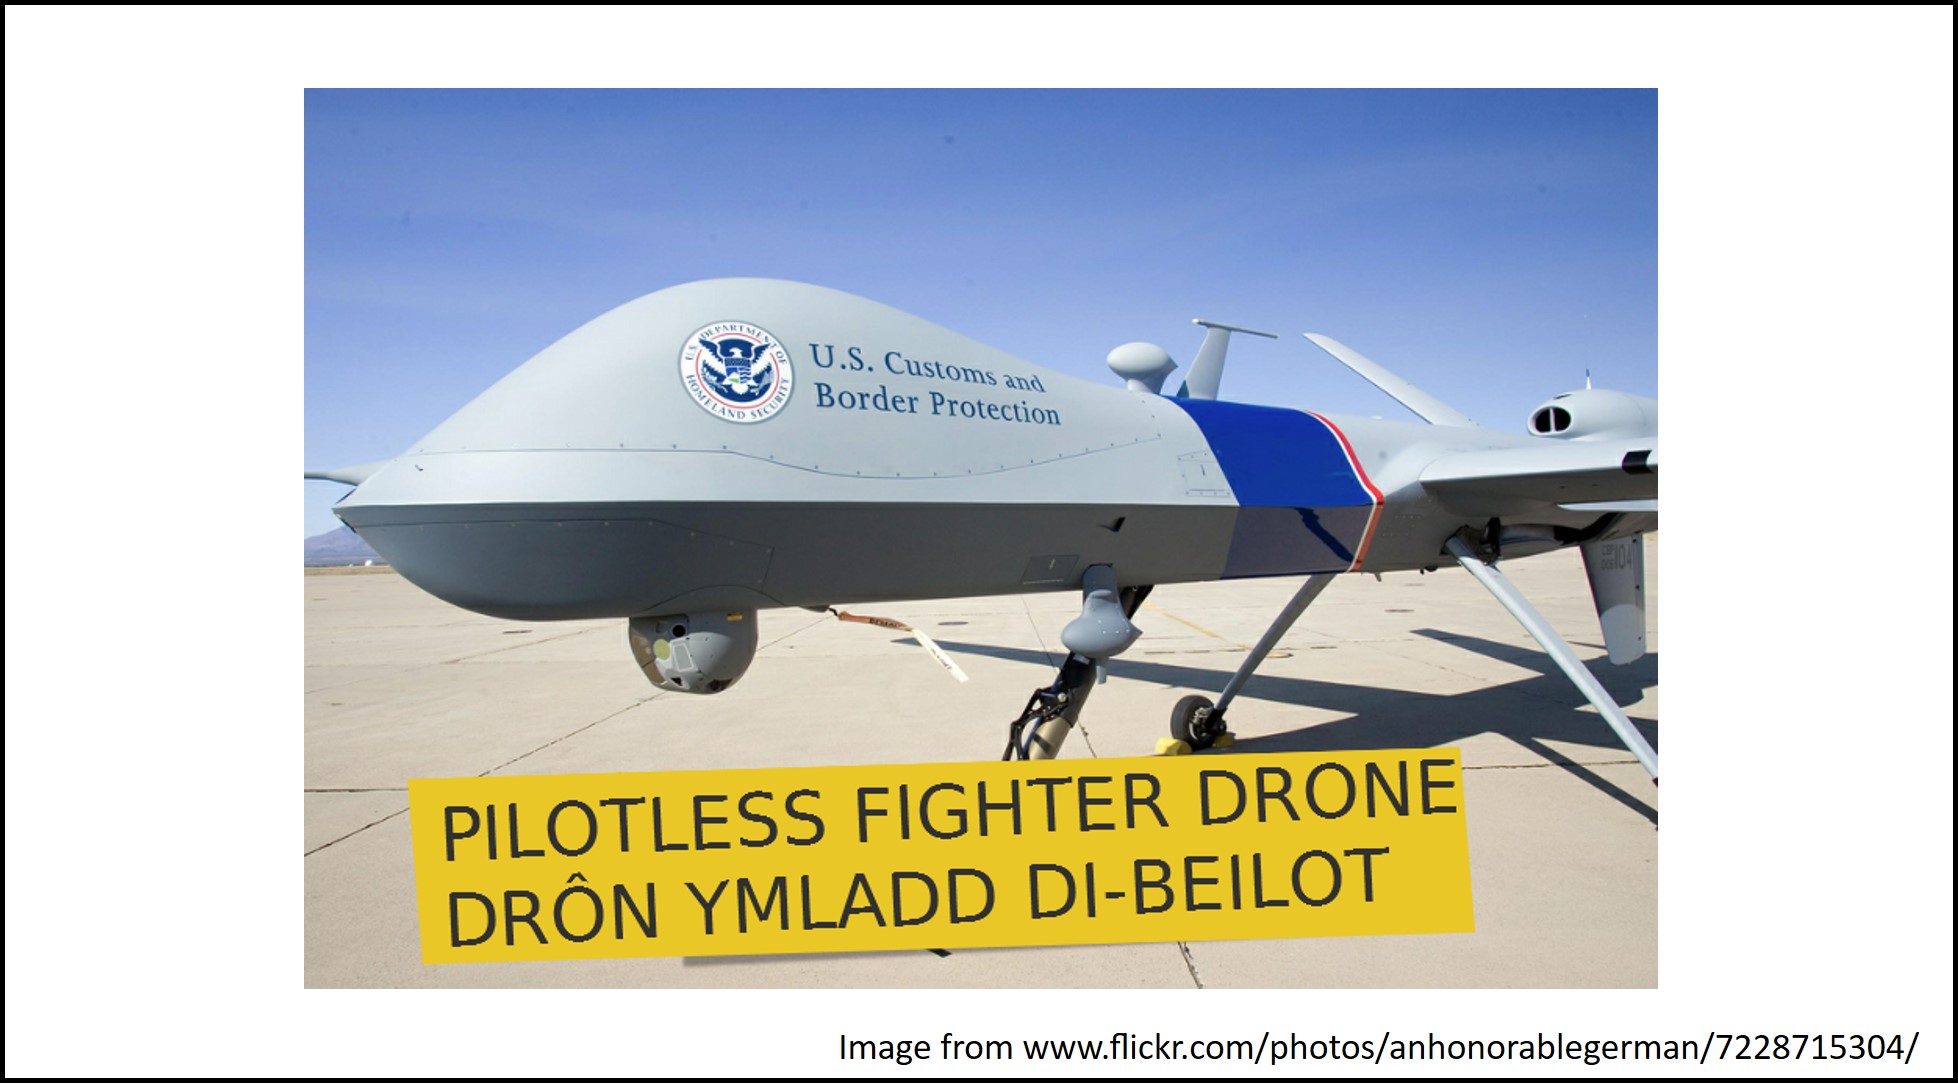 A pilotless fighter drone